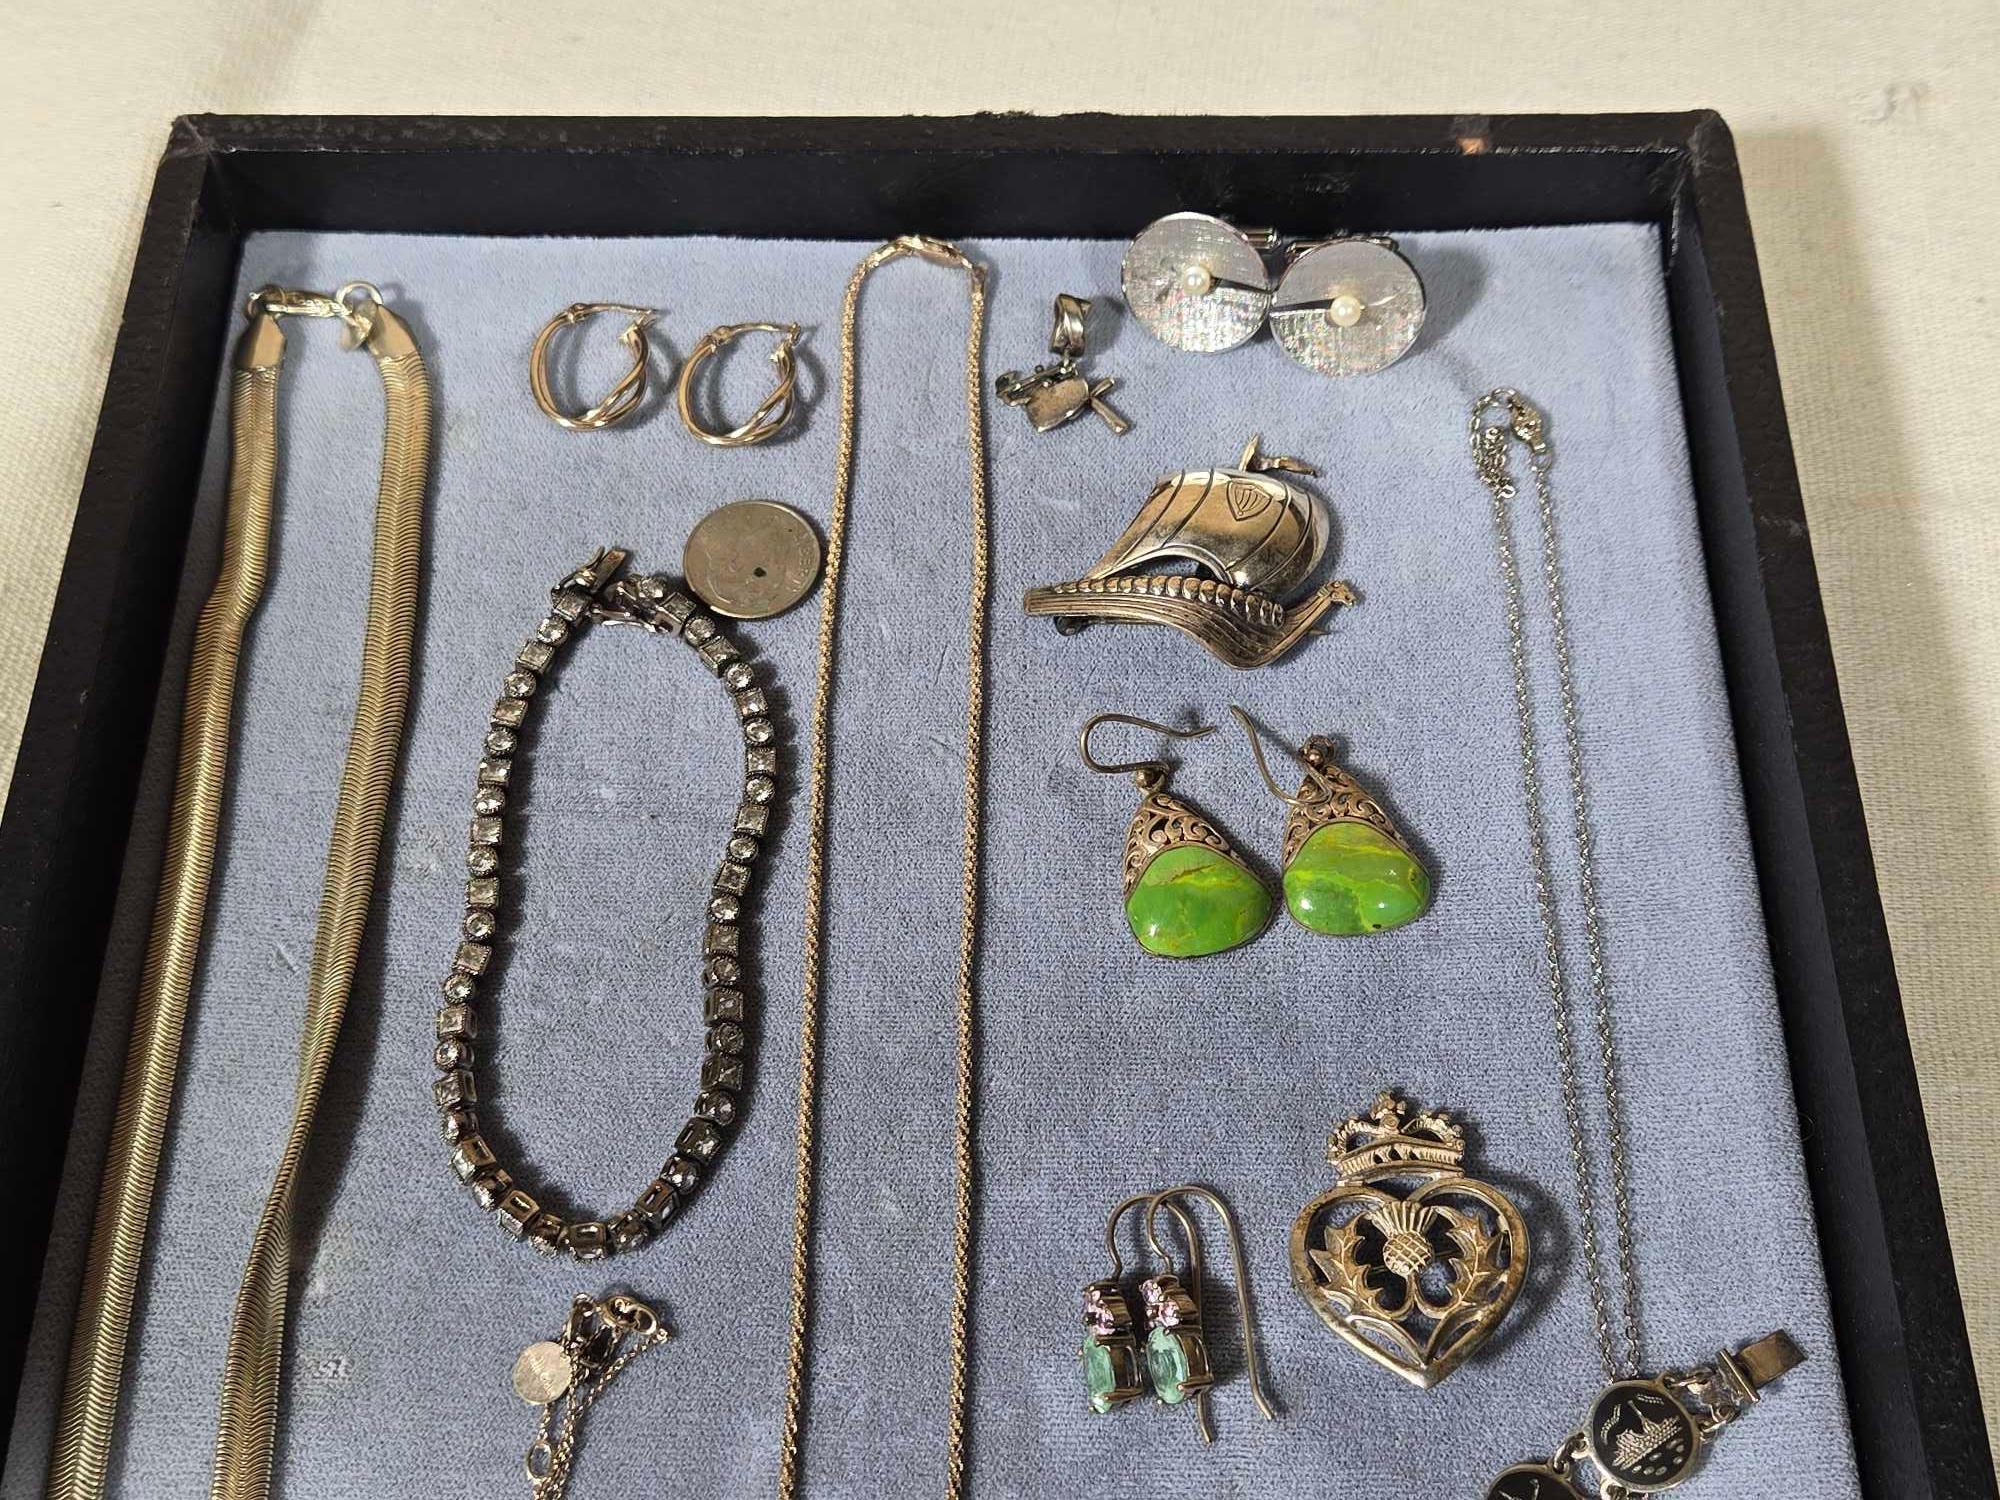 Tray of Sterling Silver Jewelry